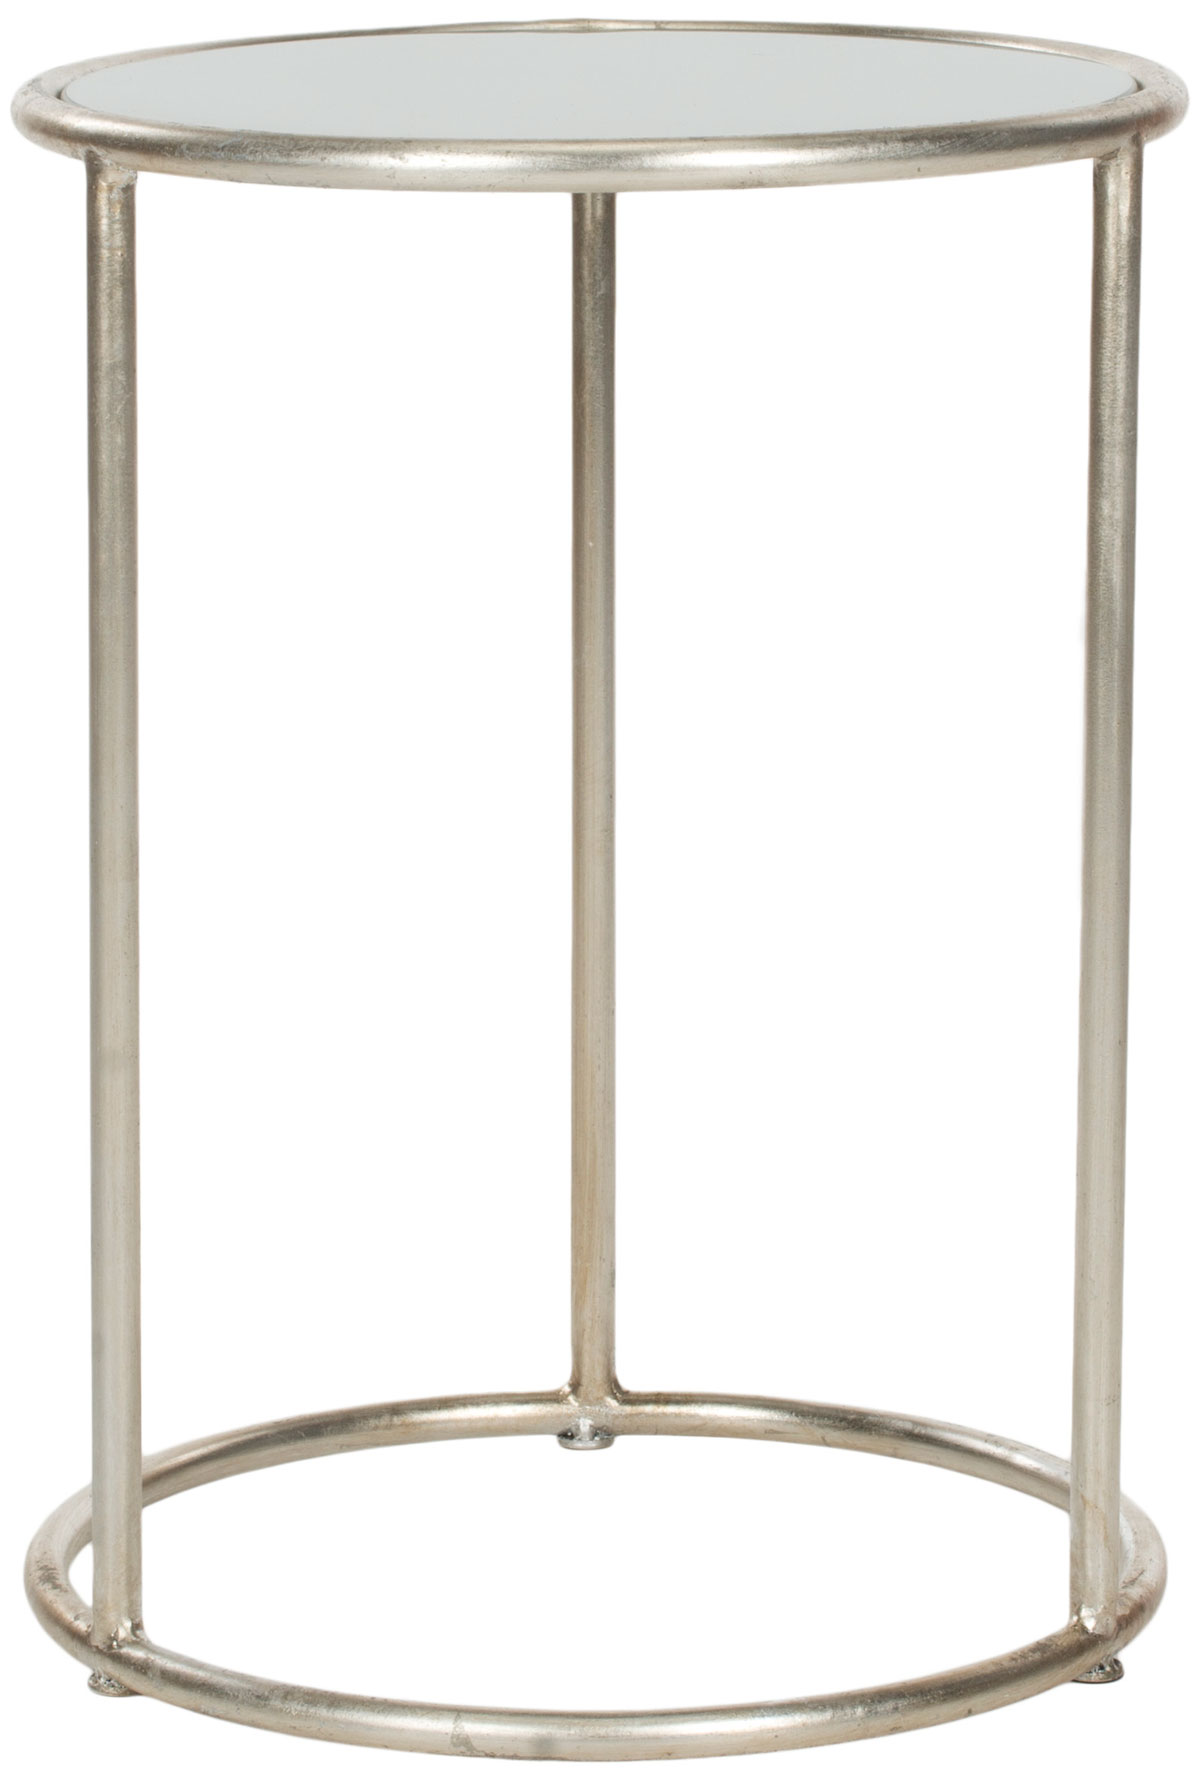 accent tables furniture safavieh front silver table share this product white outdoor end wyatt designer bedside lamps bedroom side miera diamond mirrored single barn door round